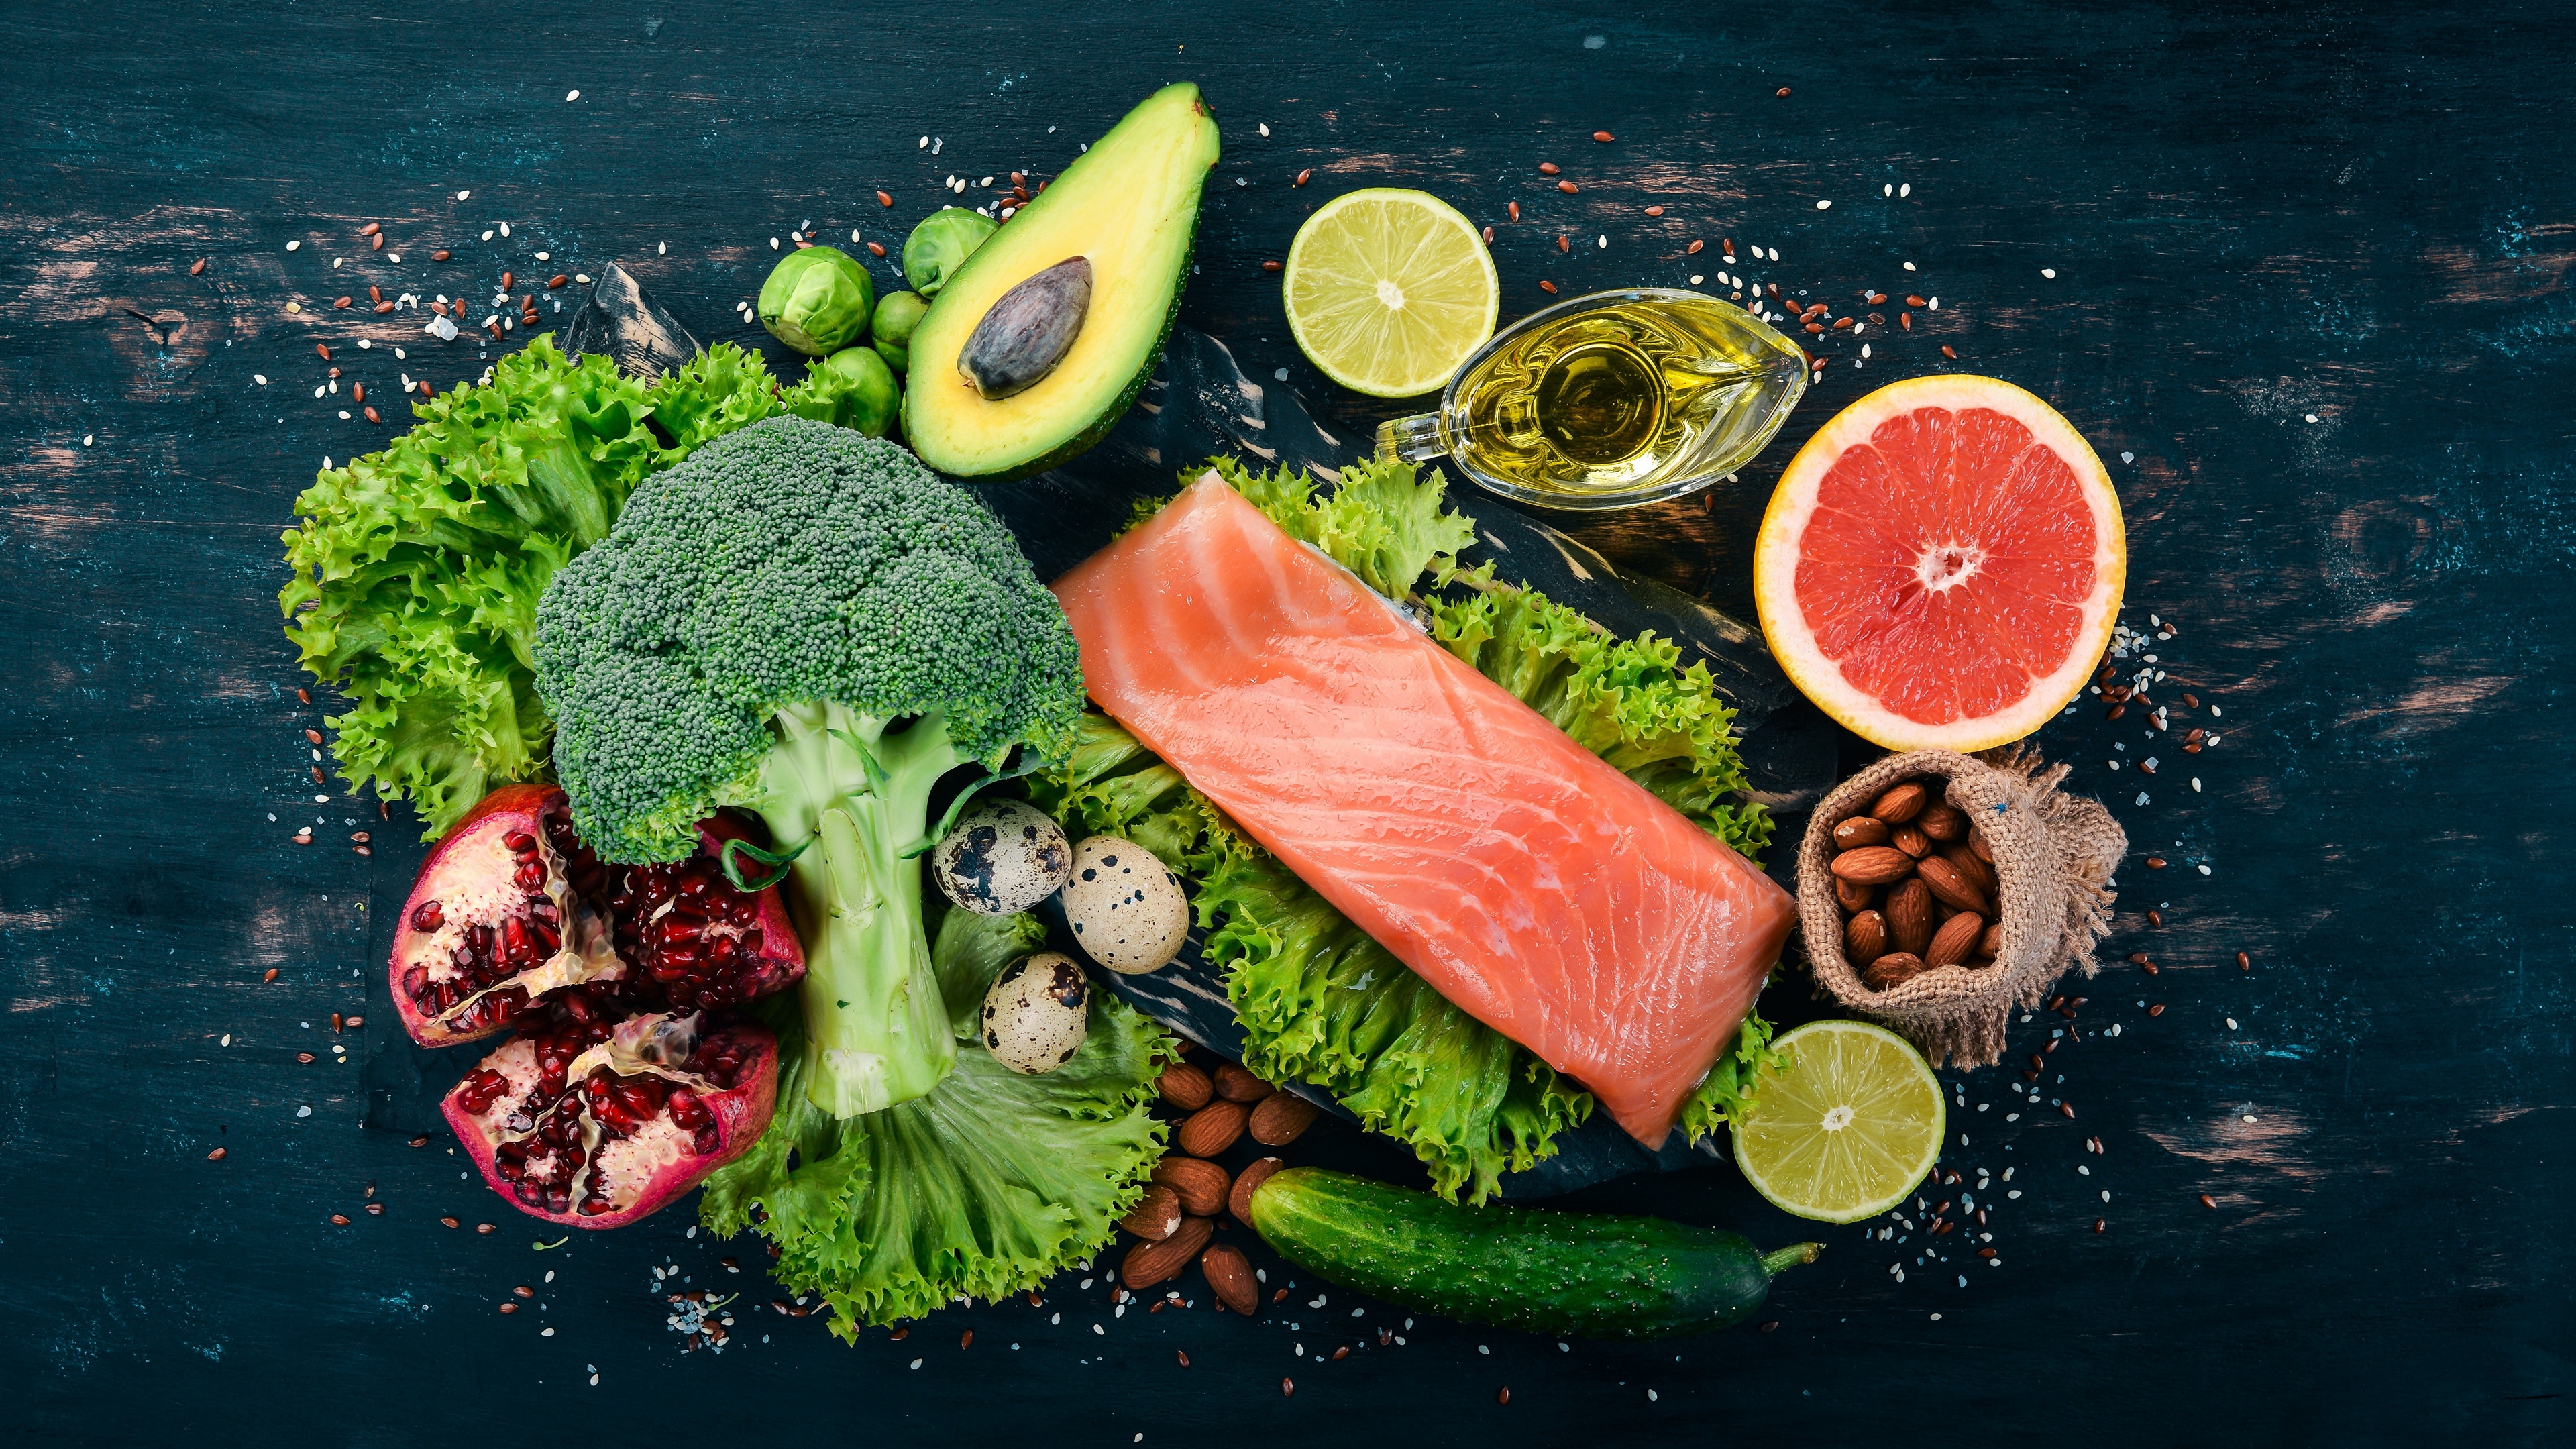 General 3840x2160 food olive oil salmon avocados cucumbers lime pomegranate almonds salad grapefruits simple background eggs broccoli lettuce still life top view